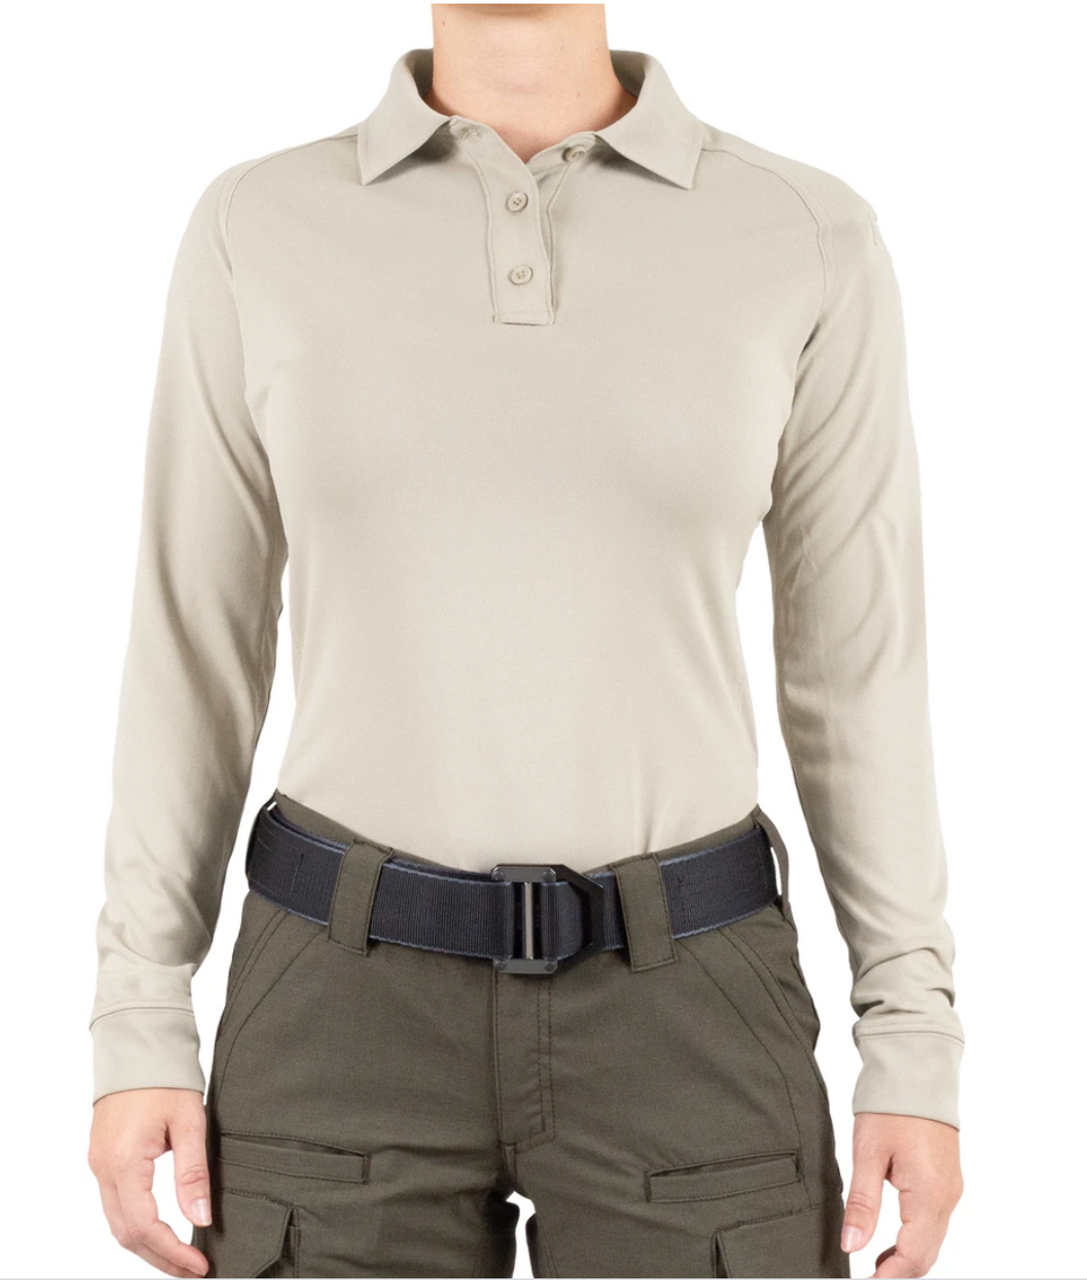 This versatile short sleeve polo with its superior fabric, features, and specialized fit is the go to shirt for active female professionals. First Tactical’s Performance Polo works as hard as you do.